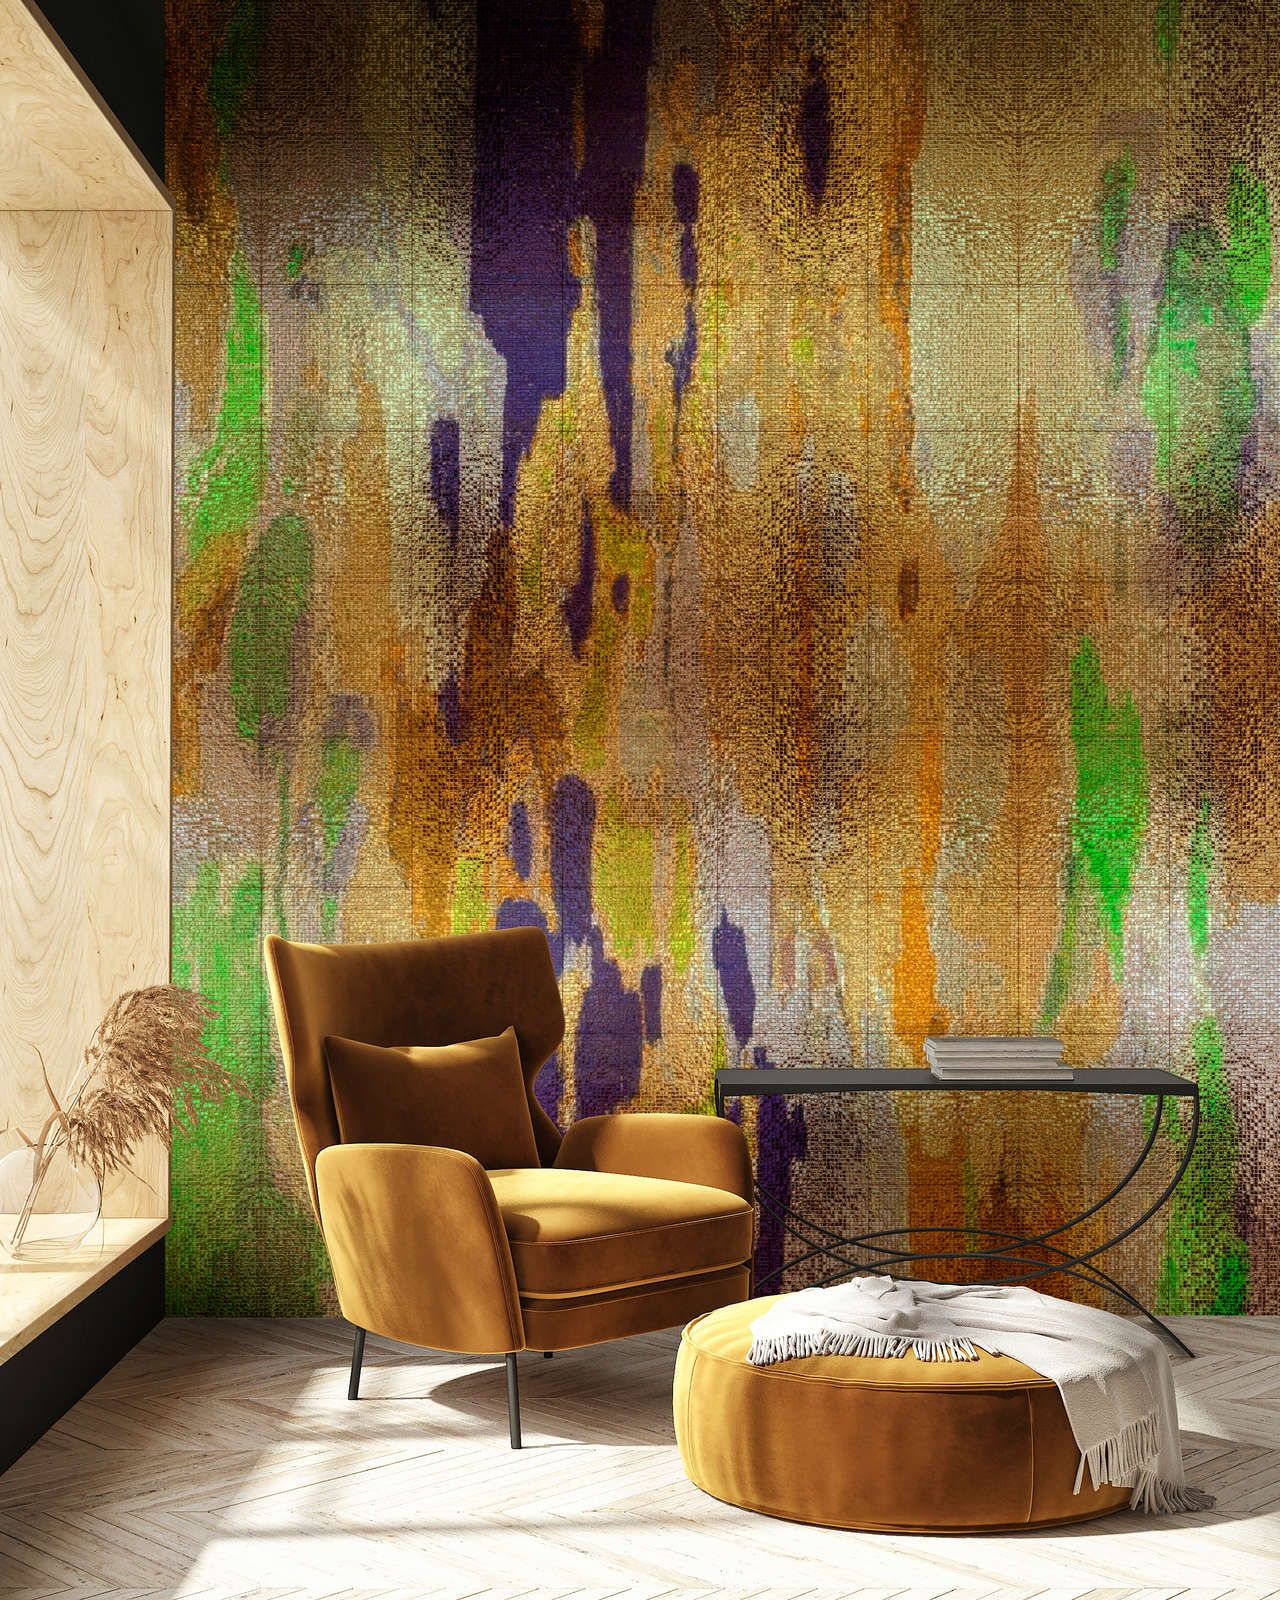             Photo wallpaper »marielle 1« - Colour gradients purple, gold, green with mosaic structure - Smooth, slightly pearly shimmering non-woven fabric
        